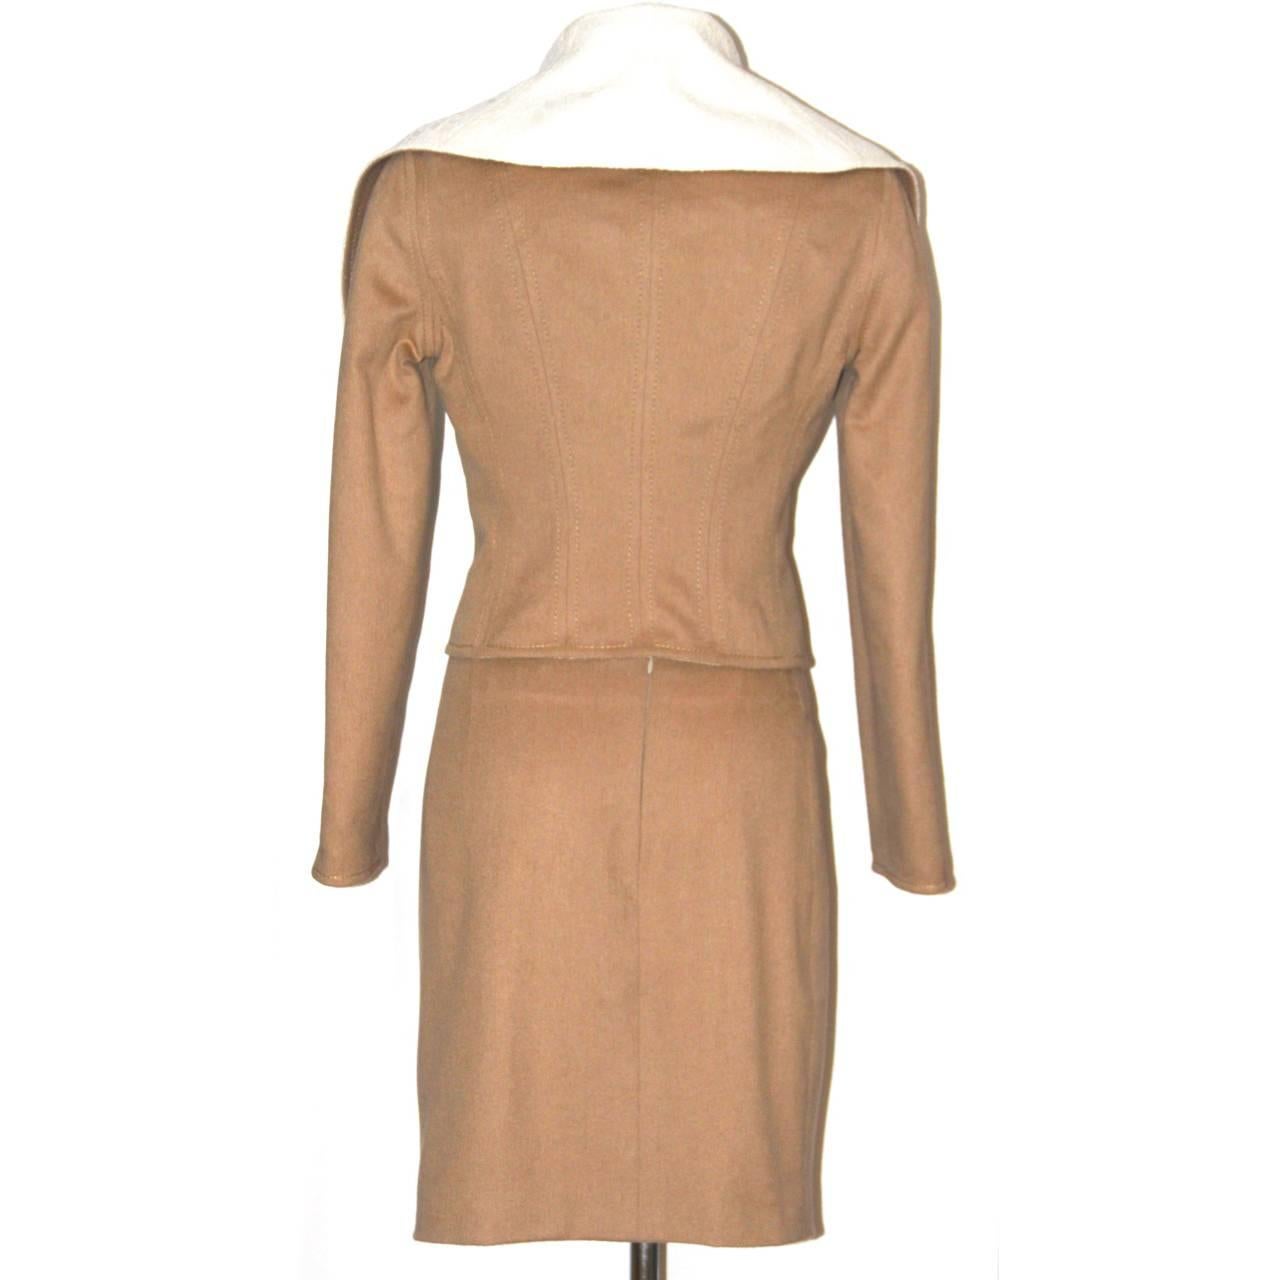 Chic and very feminine suit from the prestigious French fashion house. 
The jacket features a folder top, a corseted shape as a Christian Dior signature style and three front buttons. The classic pencil skirt features a high rise, a rear zip and a